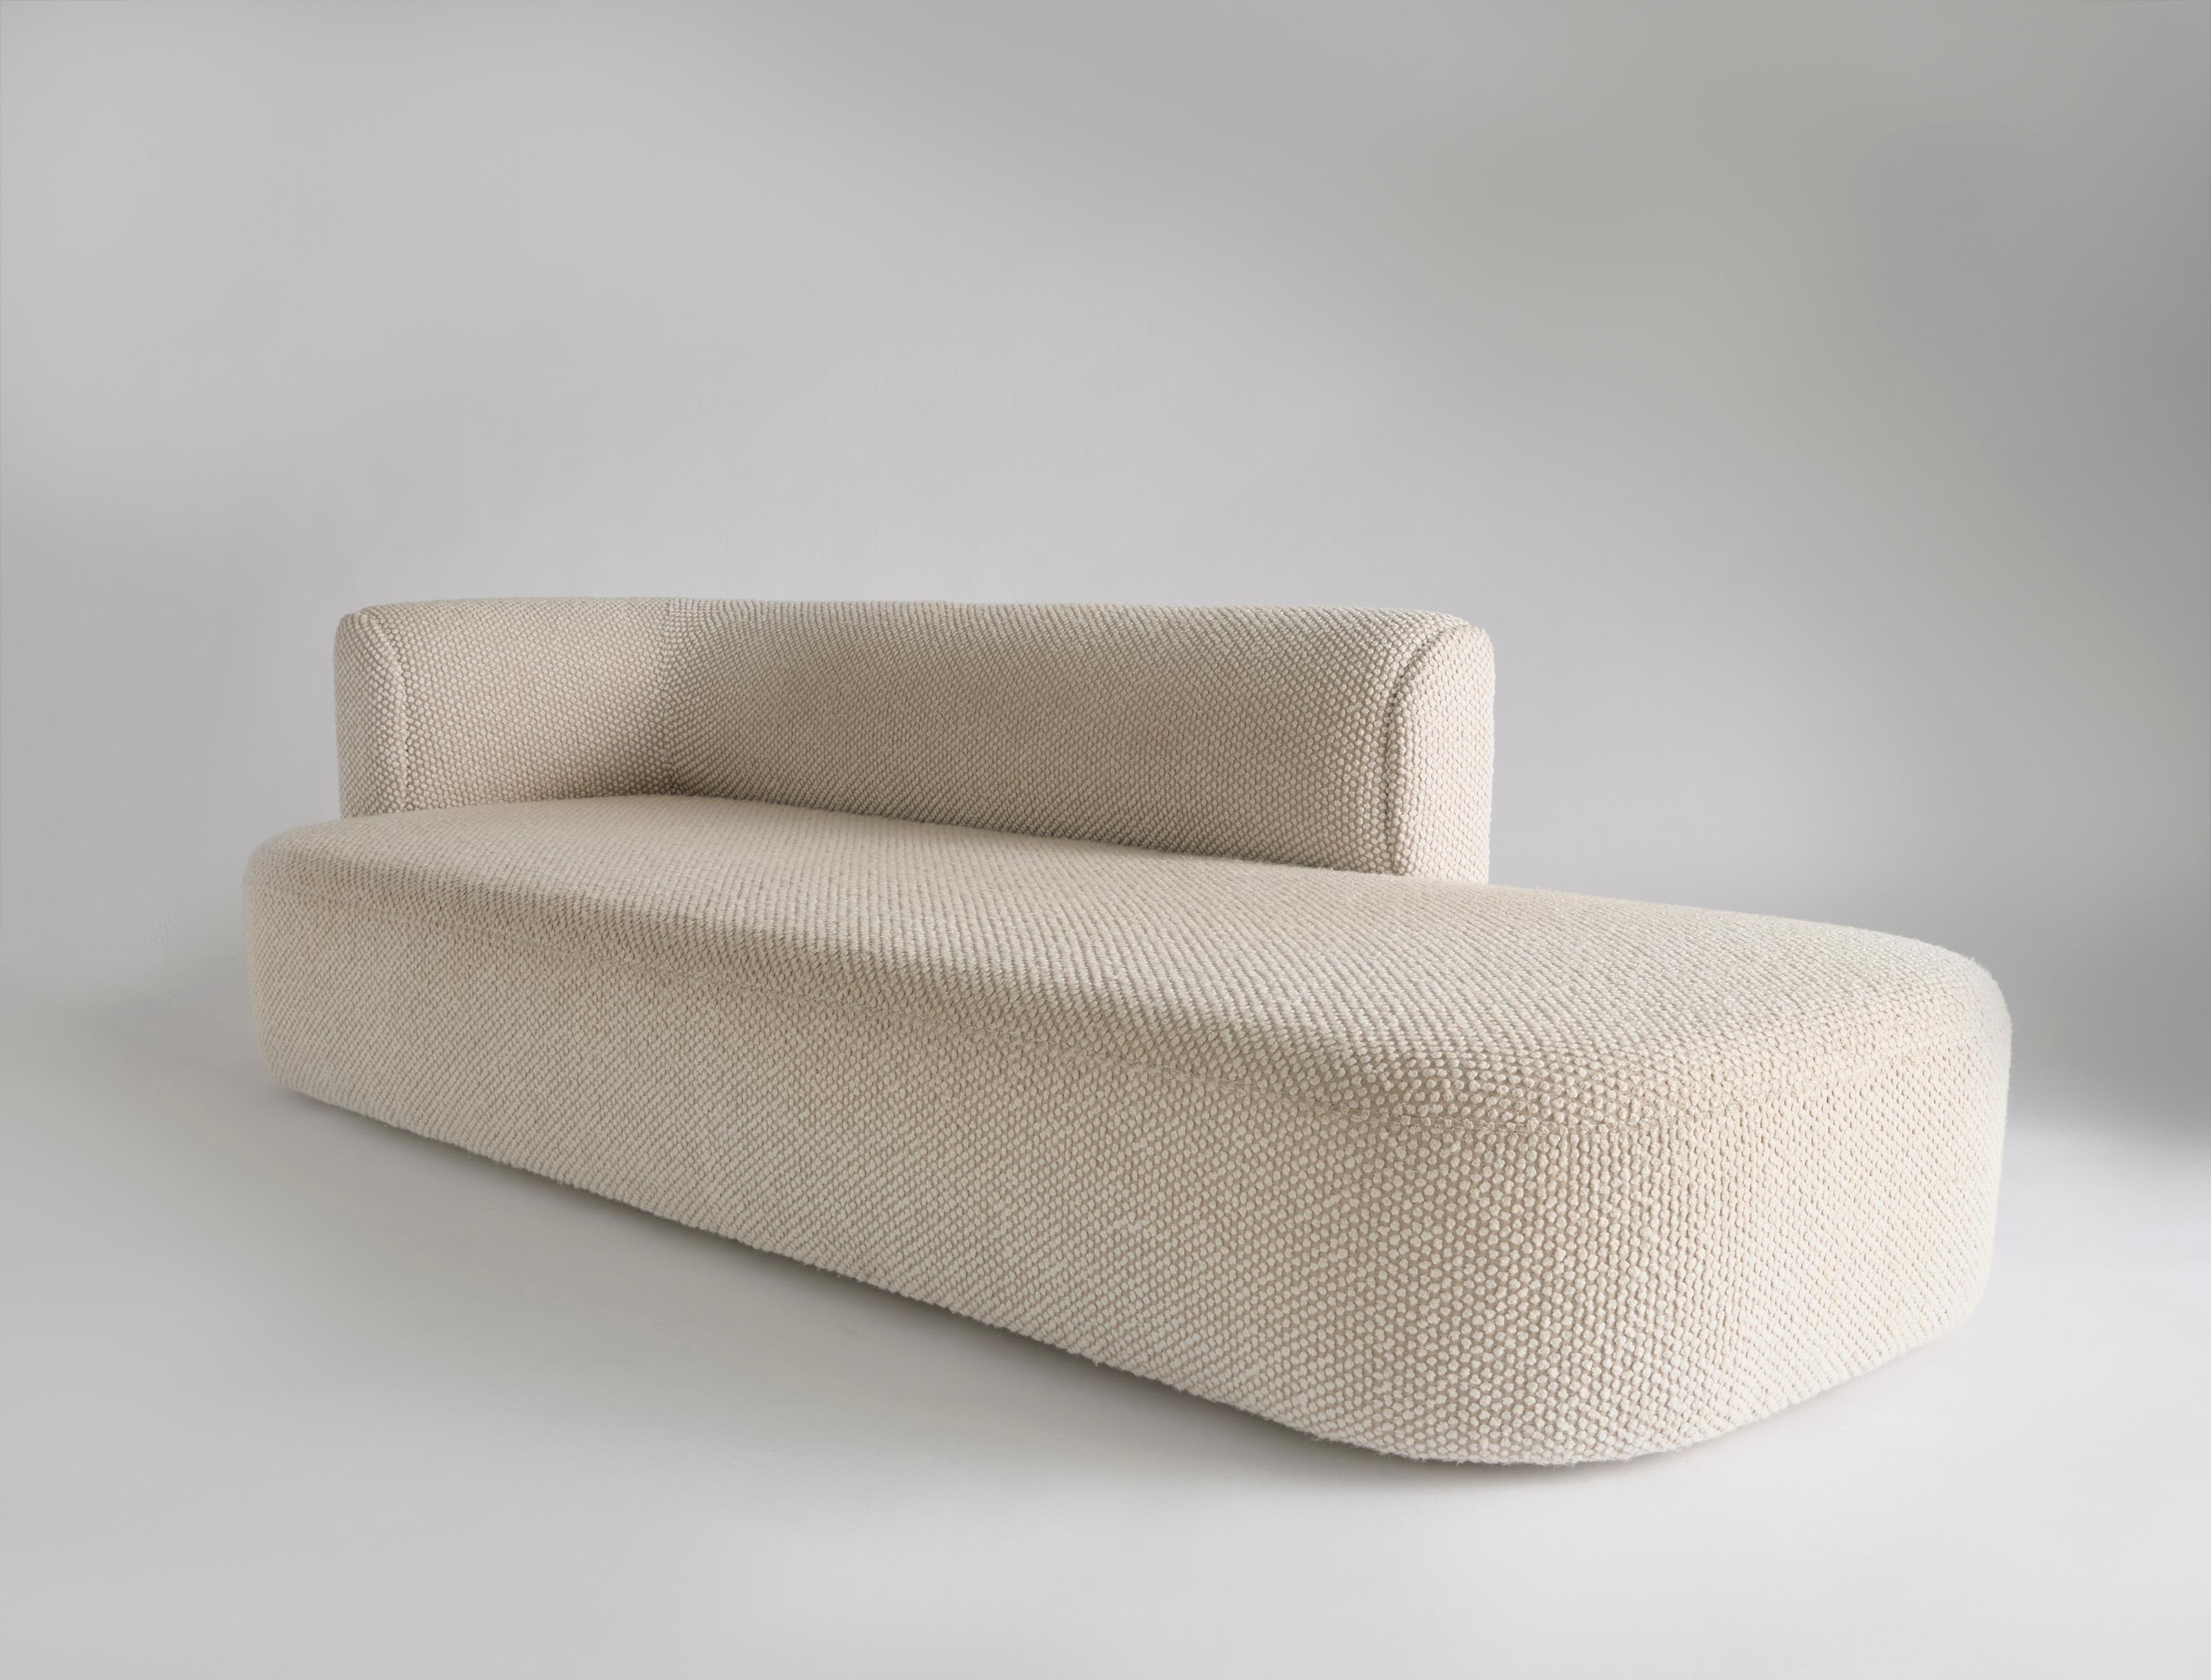 Listed price is for the capper sofa and comfort zone by HBF fabric. 
COM is also available, with a List price of $ 7,050.00.

Prices exclude packing. 

Inspired by the warmth of a hug, Capper’s design and construction envelopes you in coziness, for